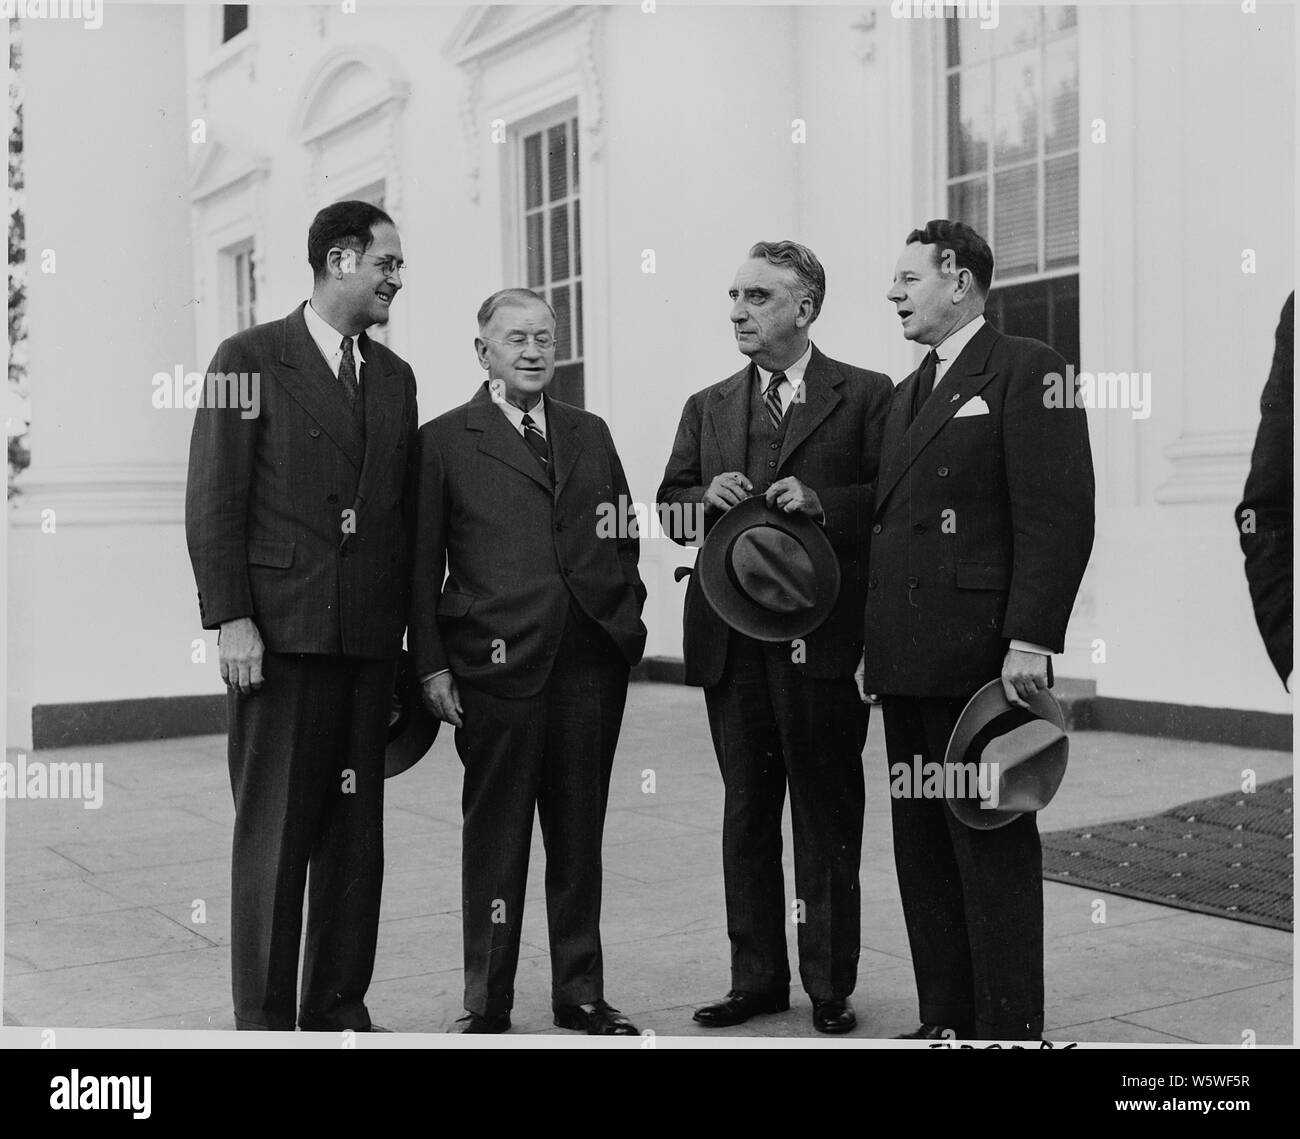 Photograph of Truman administration officials outside the White House, evidently on occasion of welcoming ceremonies for President Juan Antonio Rios of Chile: (from left to right) Secretary of Agriculture Clinton Anderson; Secretary of the Interior Harold Ickes; Secretary of the Treasury Fred Vinson; and (probably) John Blandford, Jr. of the National Housing Agency. Stock Photo